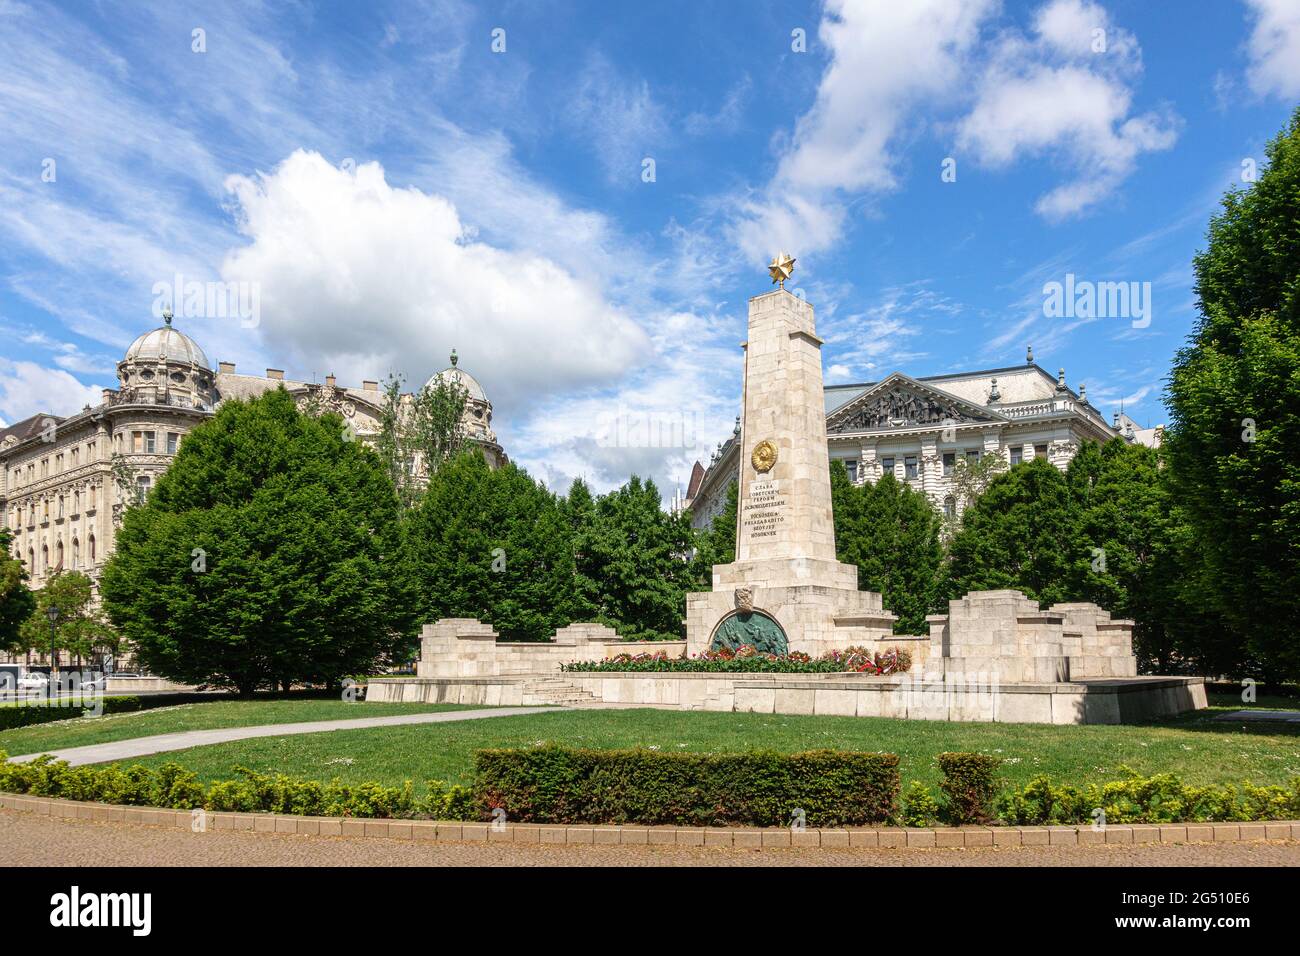 The Soviet War Memorial in central Budapest at Szabadsag ter Stock Photo